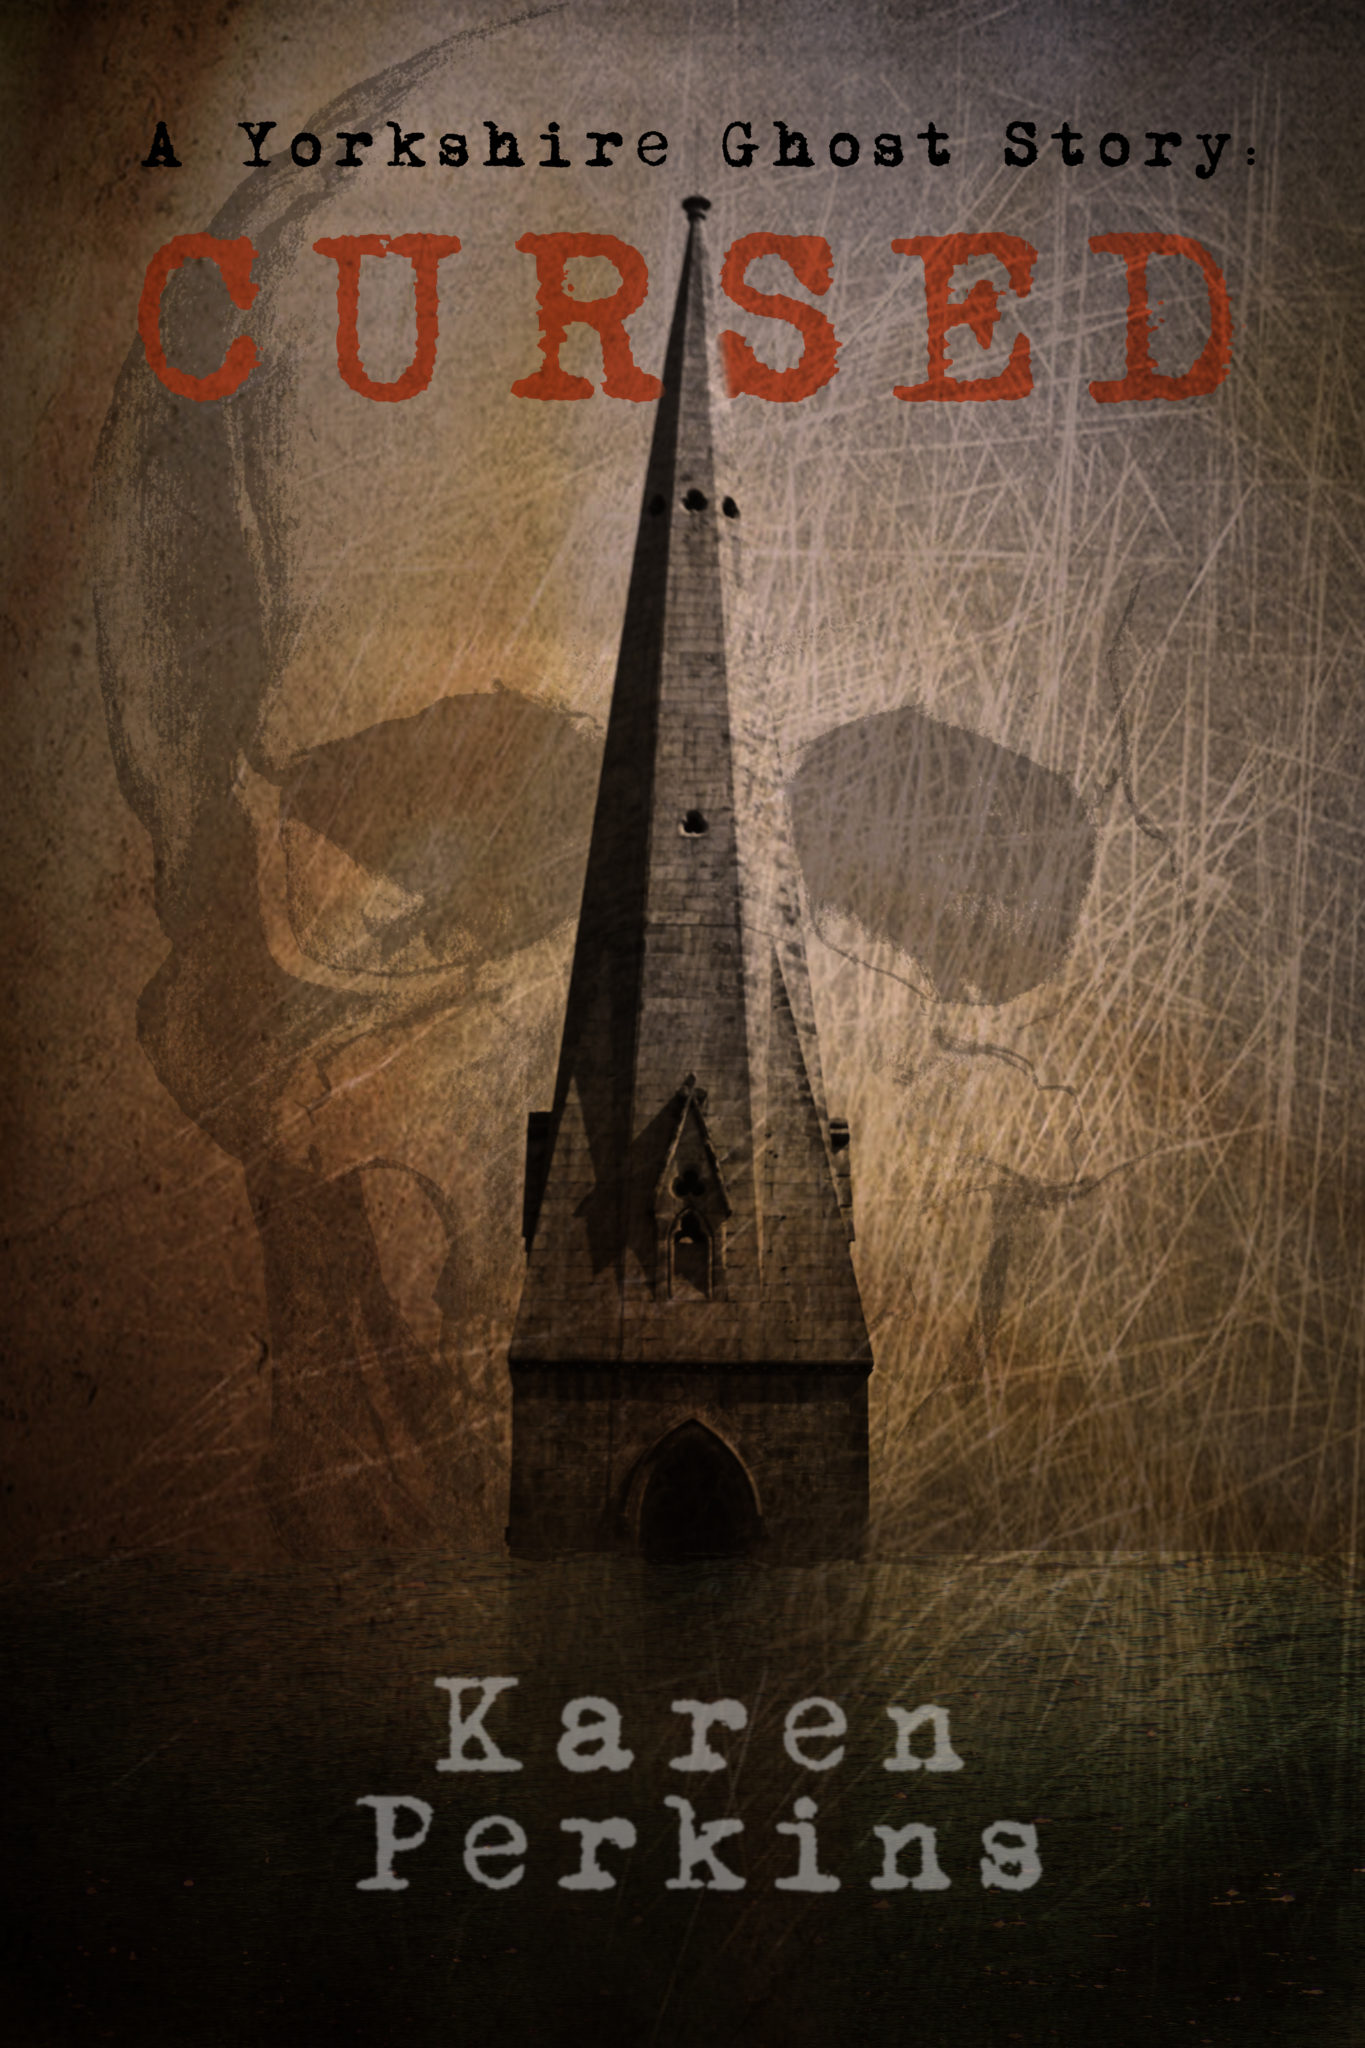 Cursed: A Yorkshire Ghost Short Story by Karen Perkins